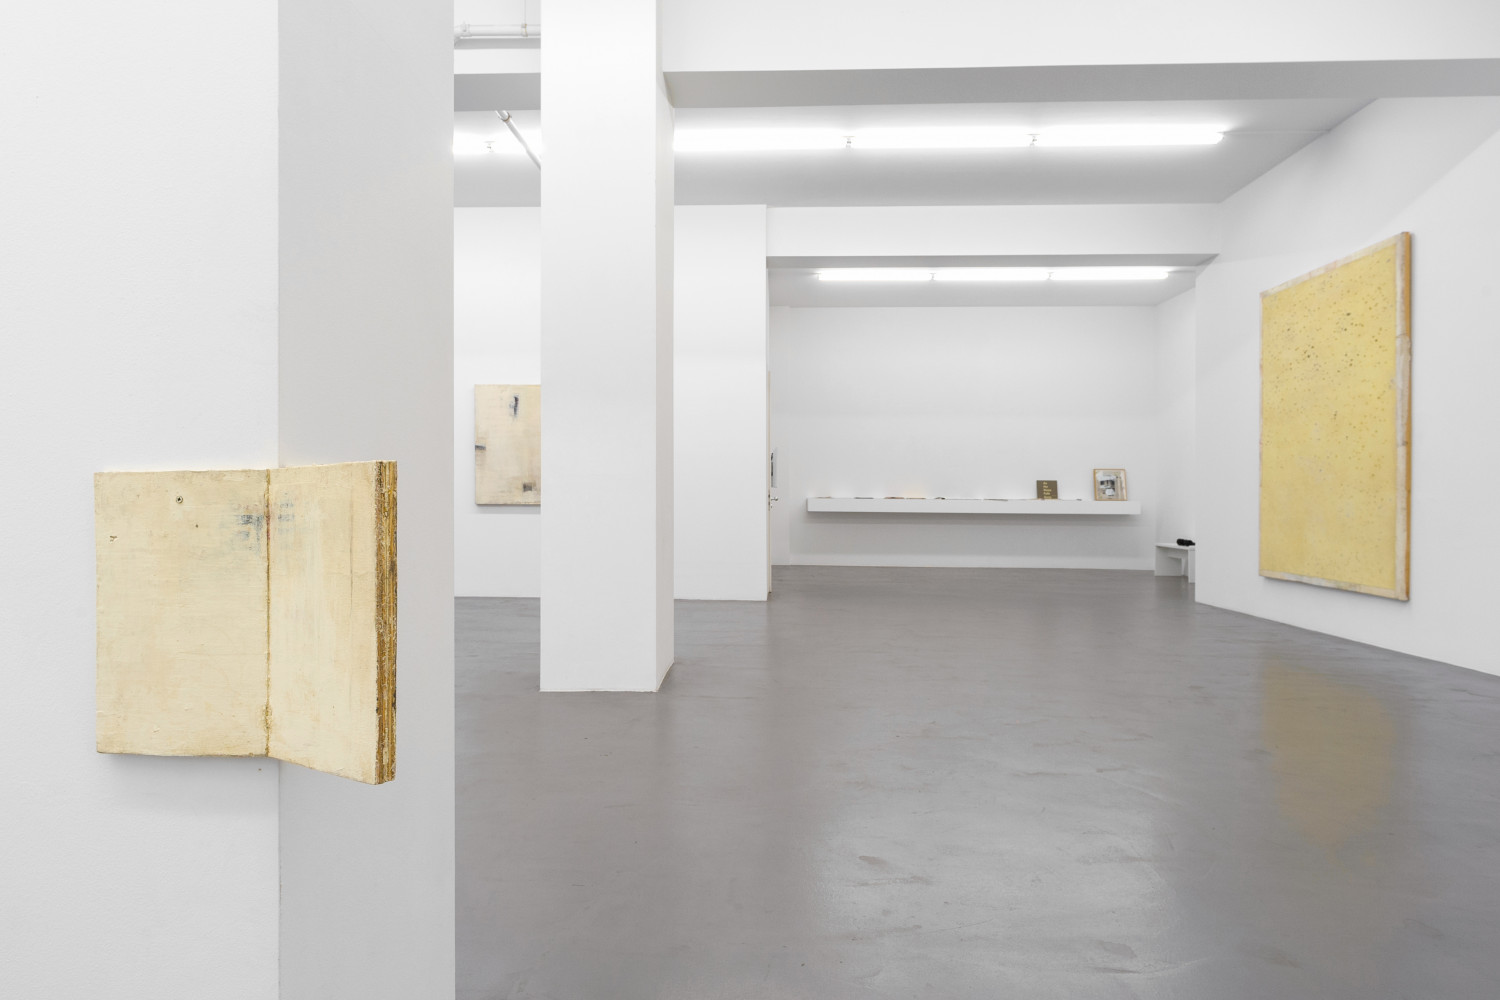 Lawrence Carroll, ‘A Tribute to Lawrence Carroll’, Installationsansicht, Buchmann Galerie, 2019